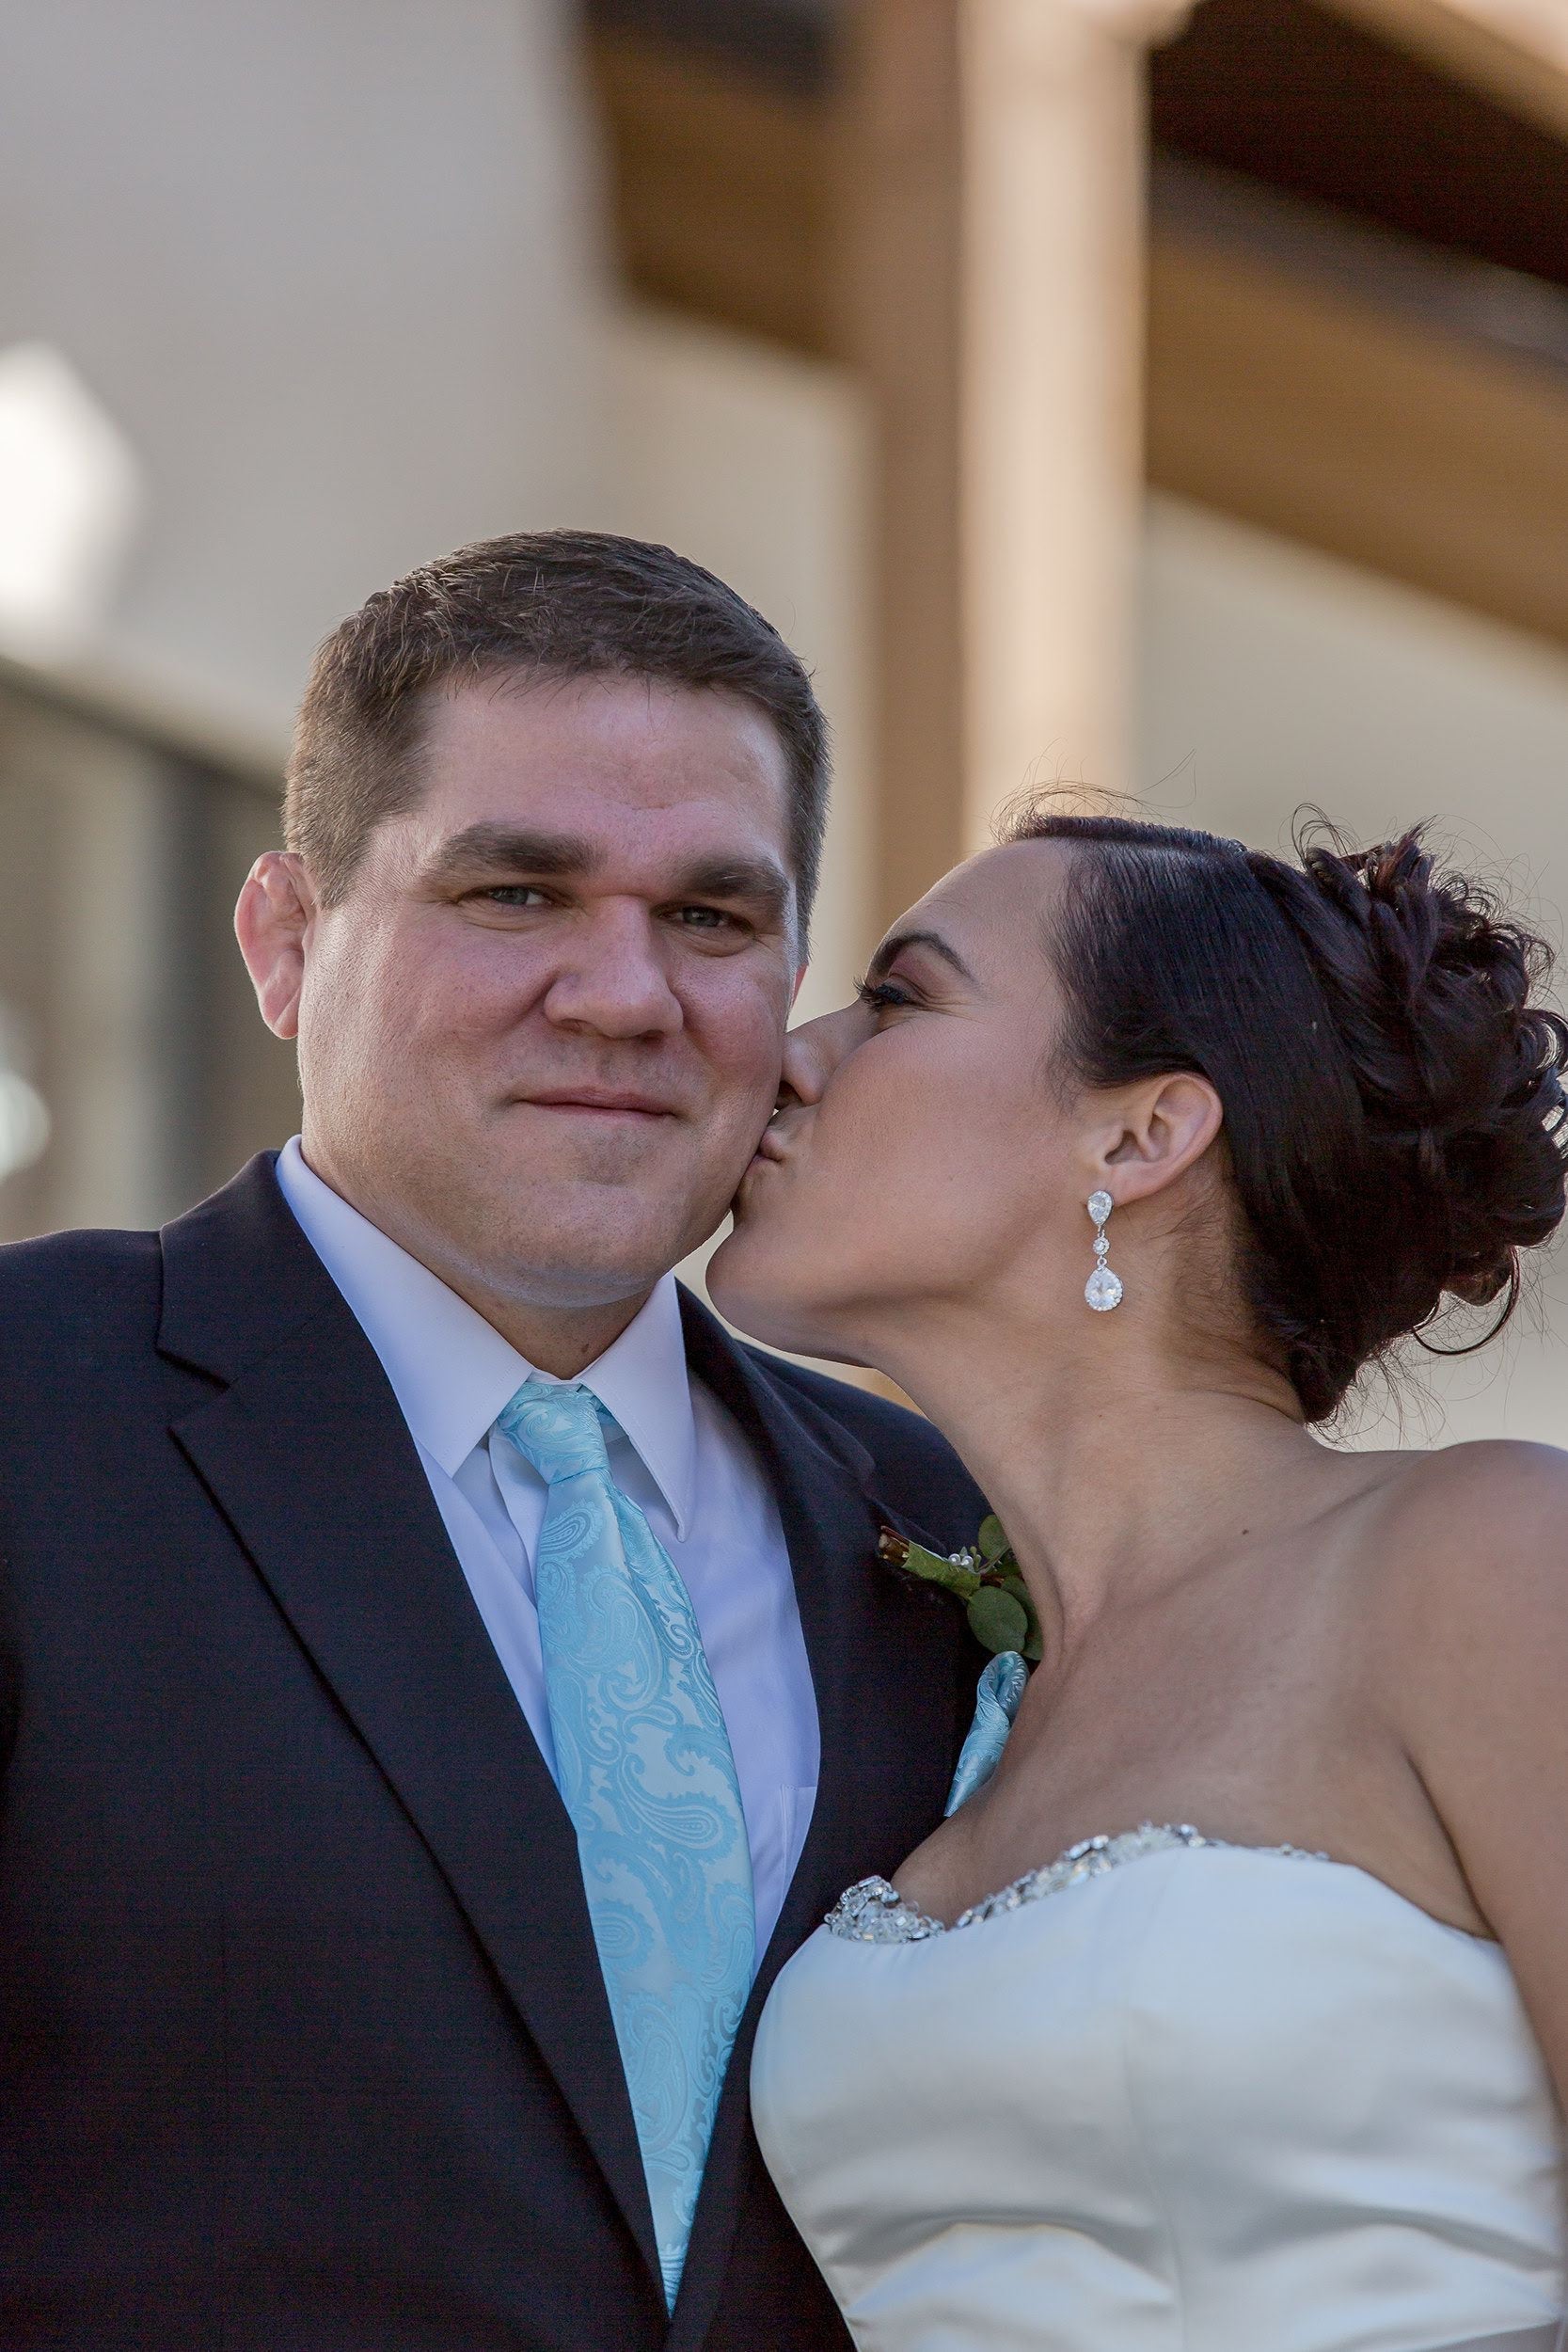 Bride wearing Long Crystal Cubic Zirconia Teardrop Earrings in a silver colored rhodium plated brass setting. in her wedding.